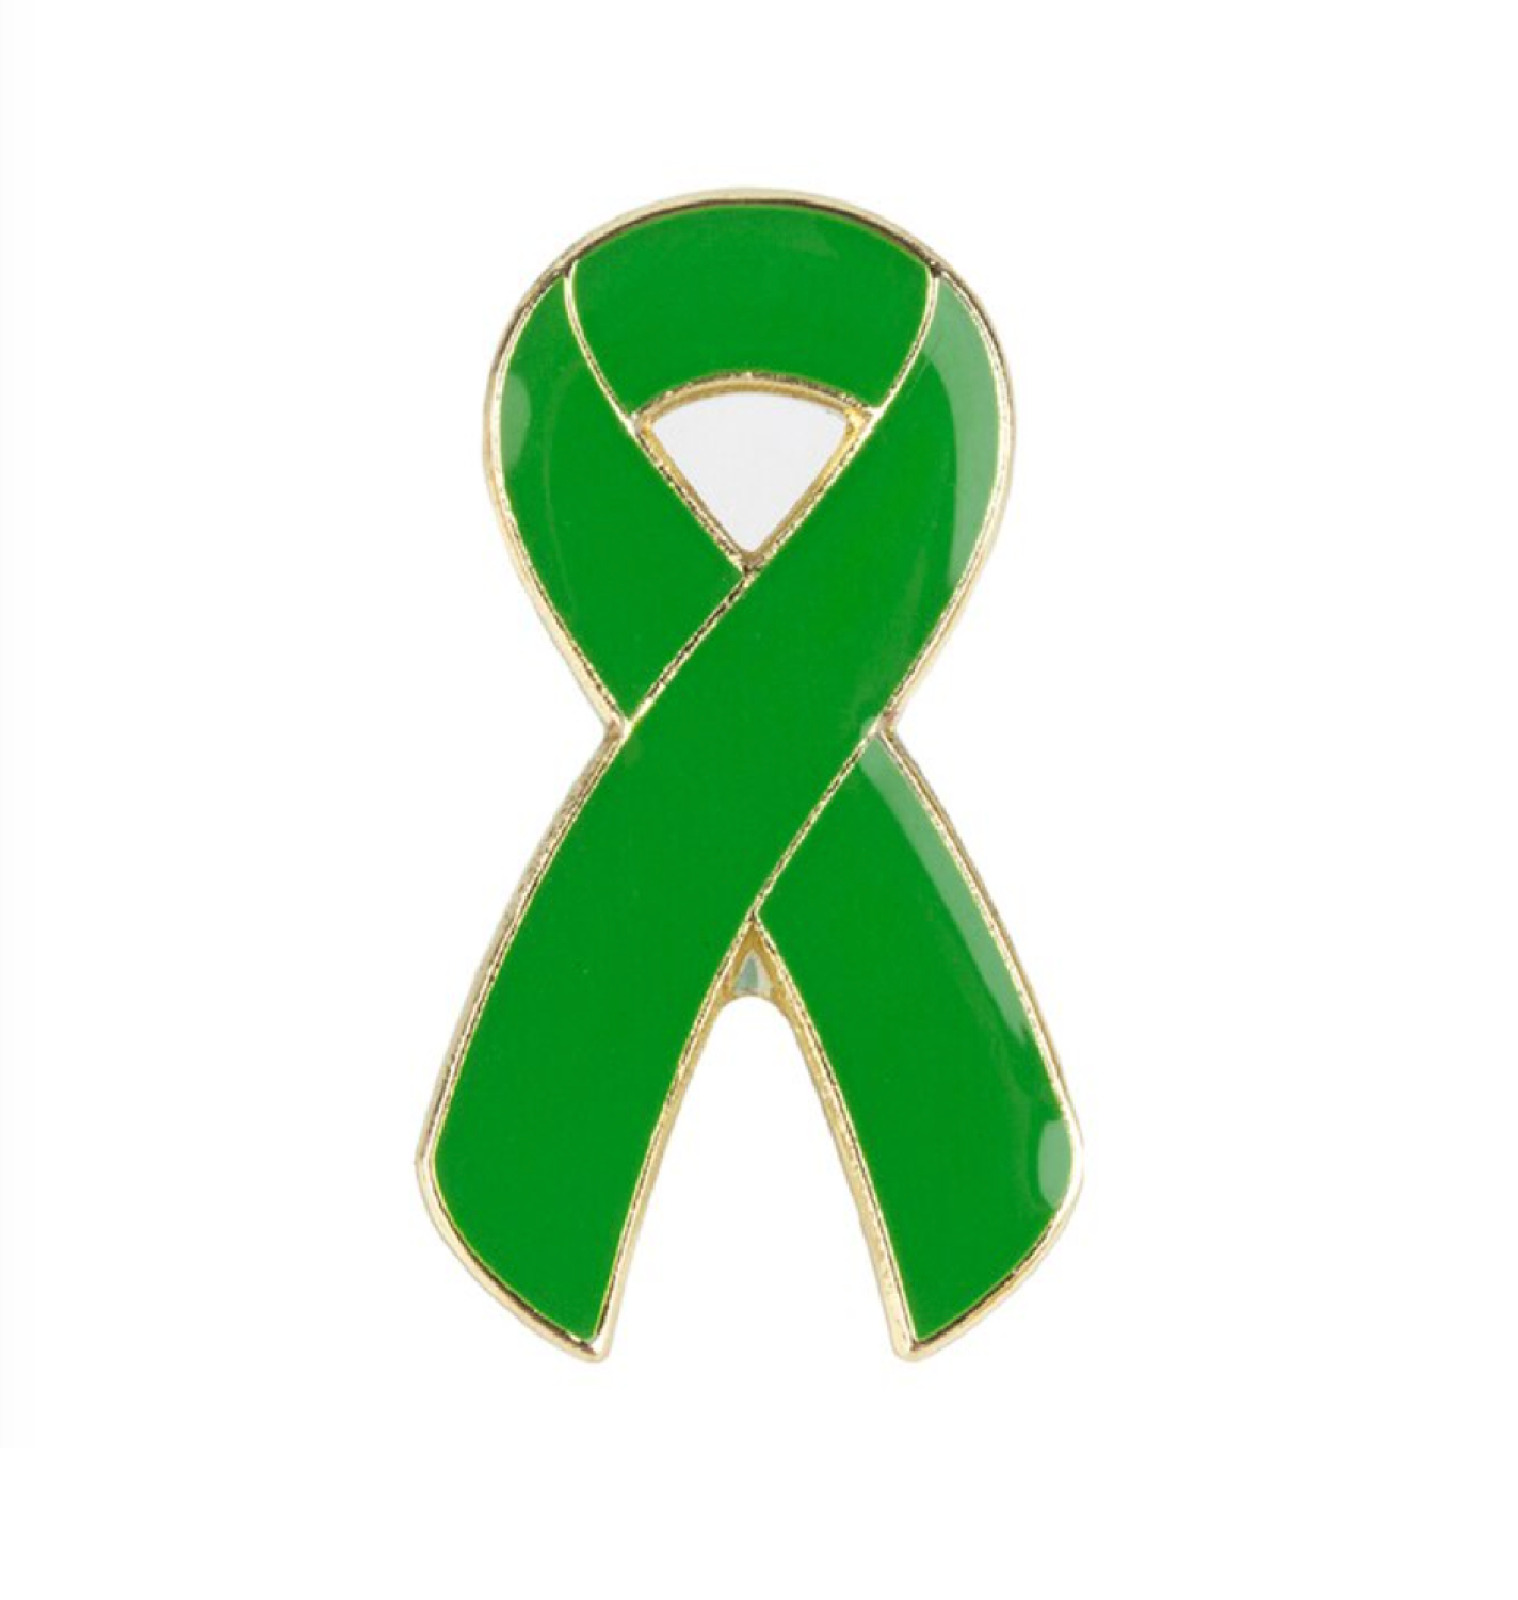 Green Ribbon Bow Mental Health Support Wellbeing Pin Badge Lapel Brooch Gift